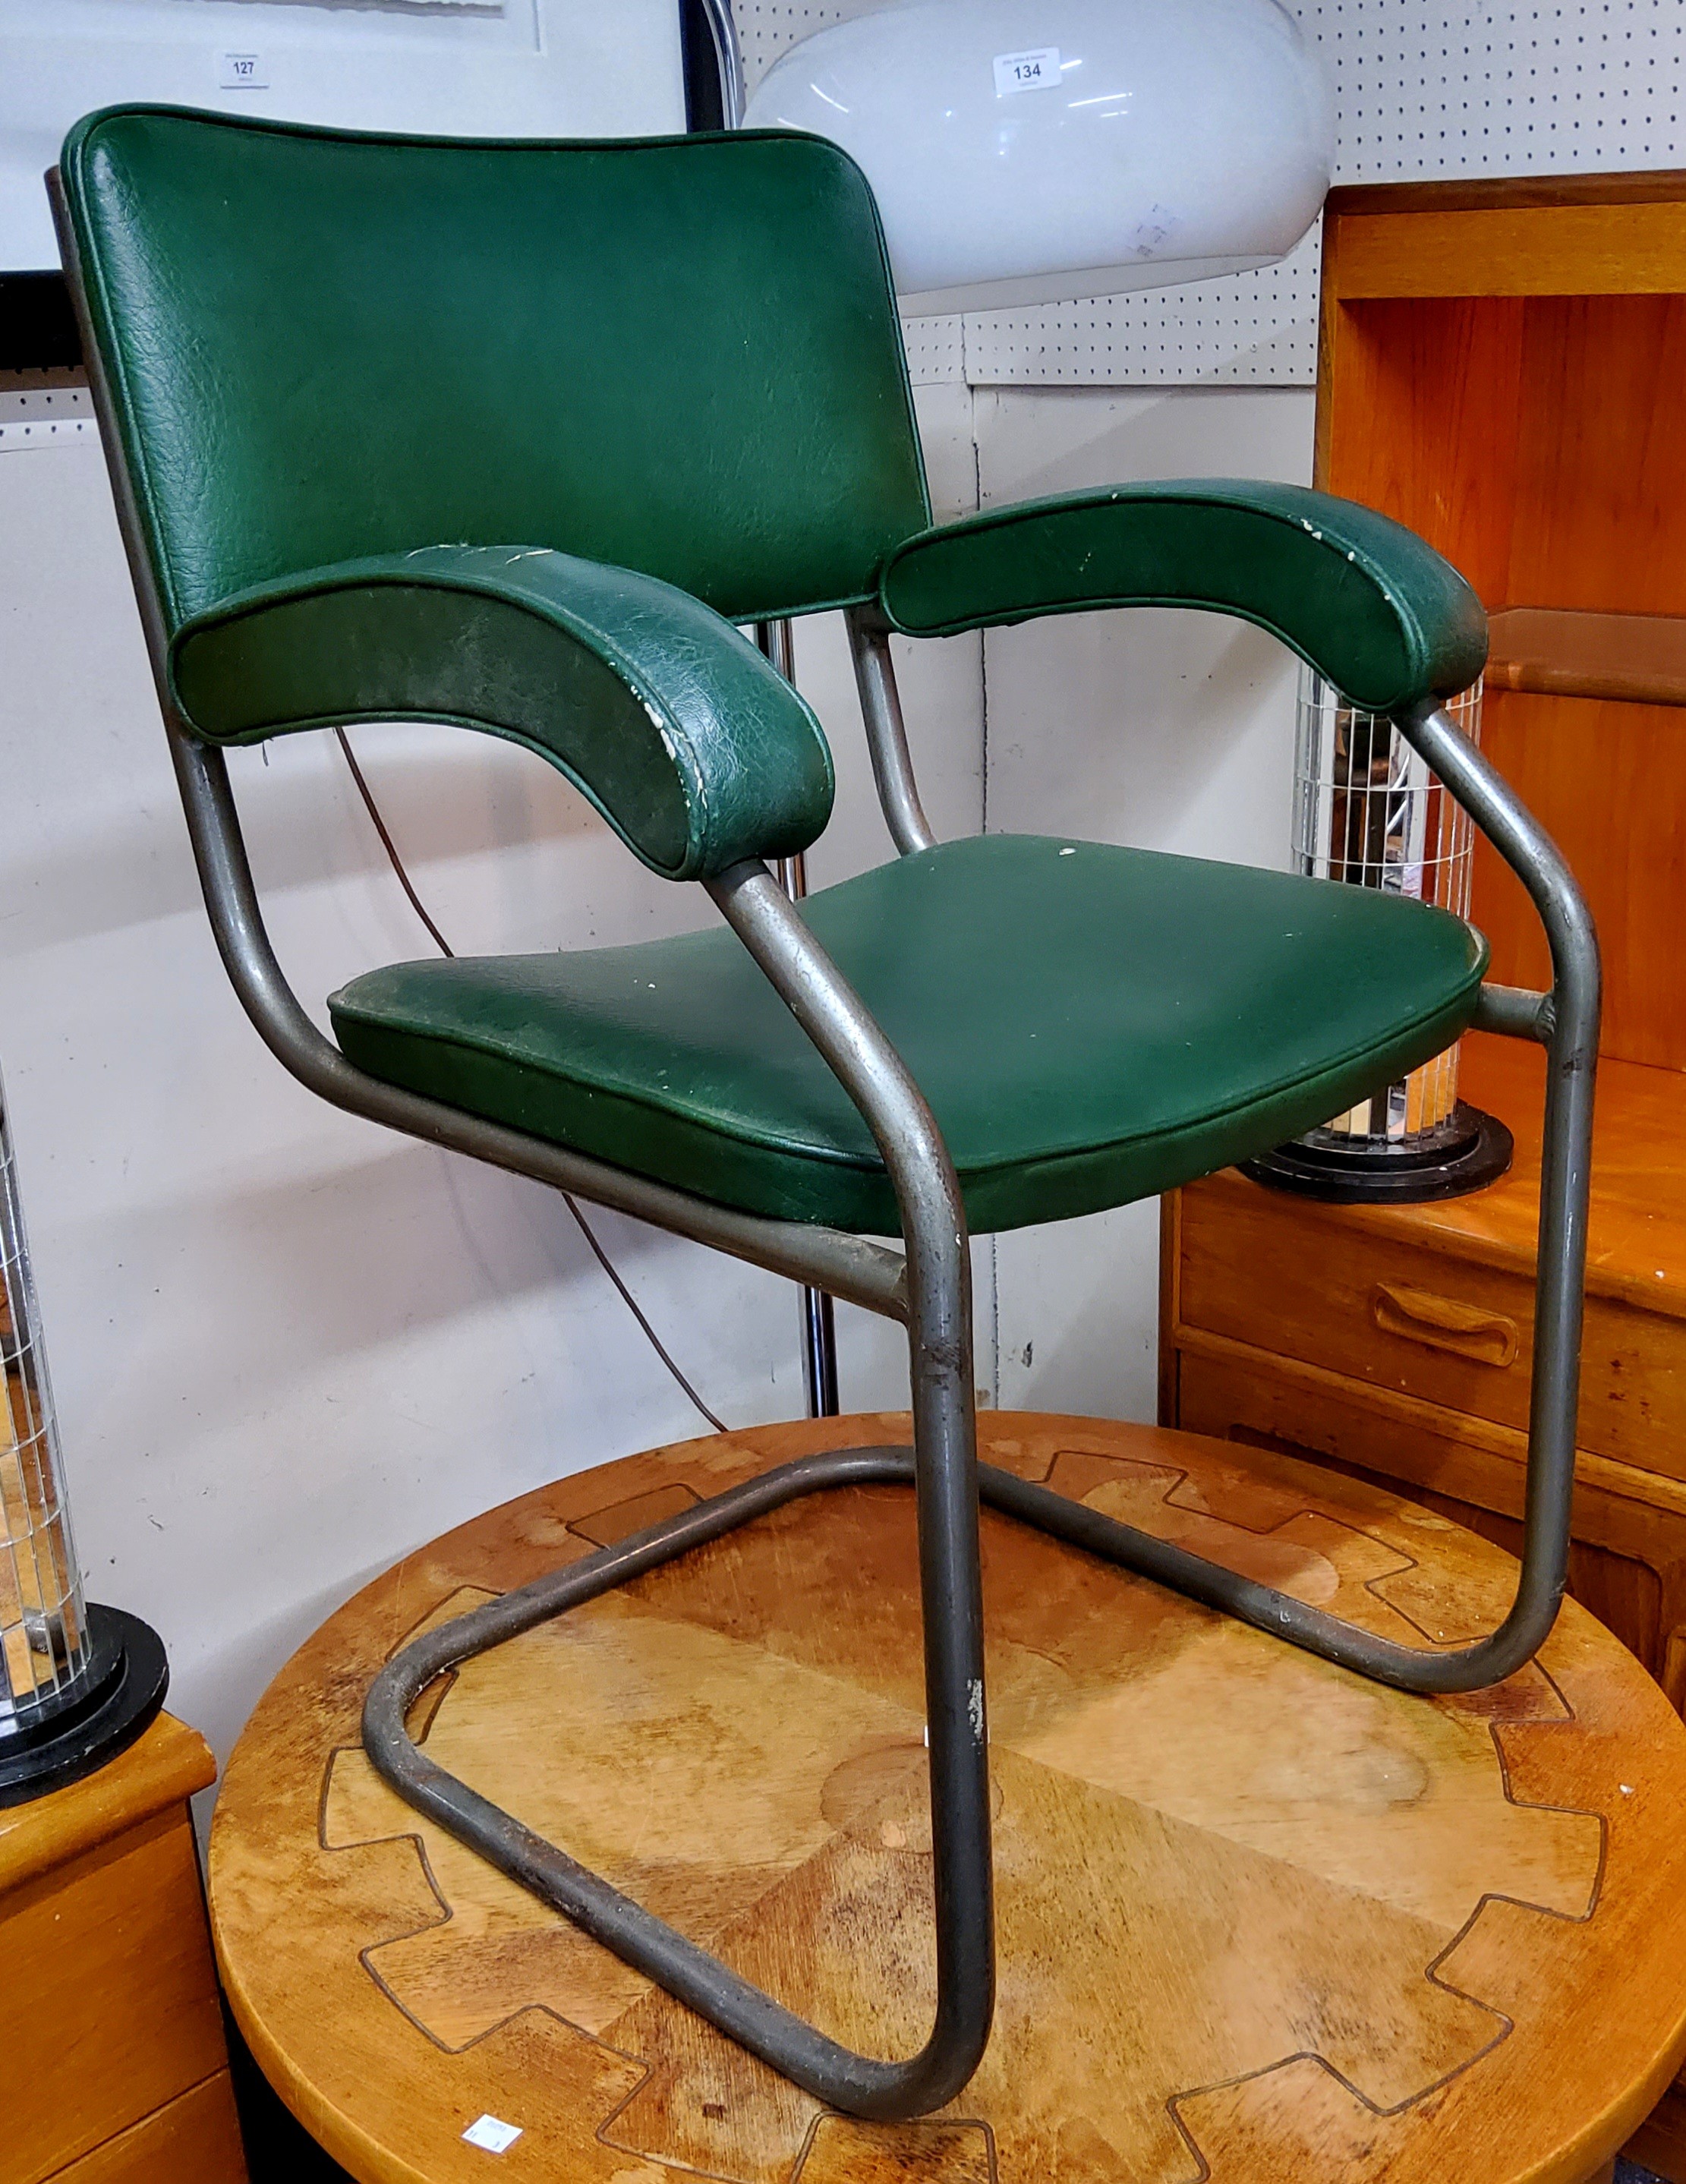 A Modernist  tubular chrome and faux green leather office chair, mid 20th century